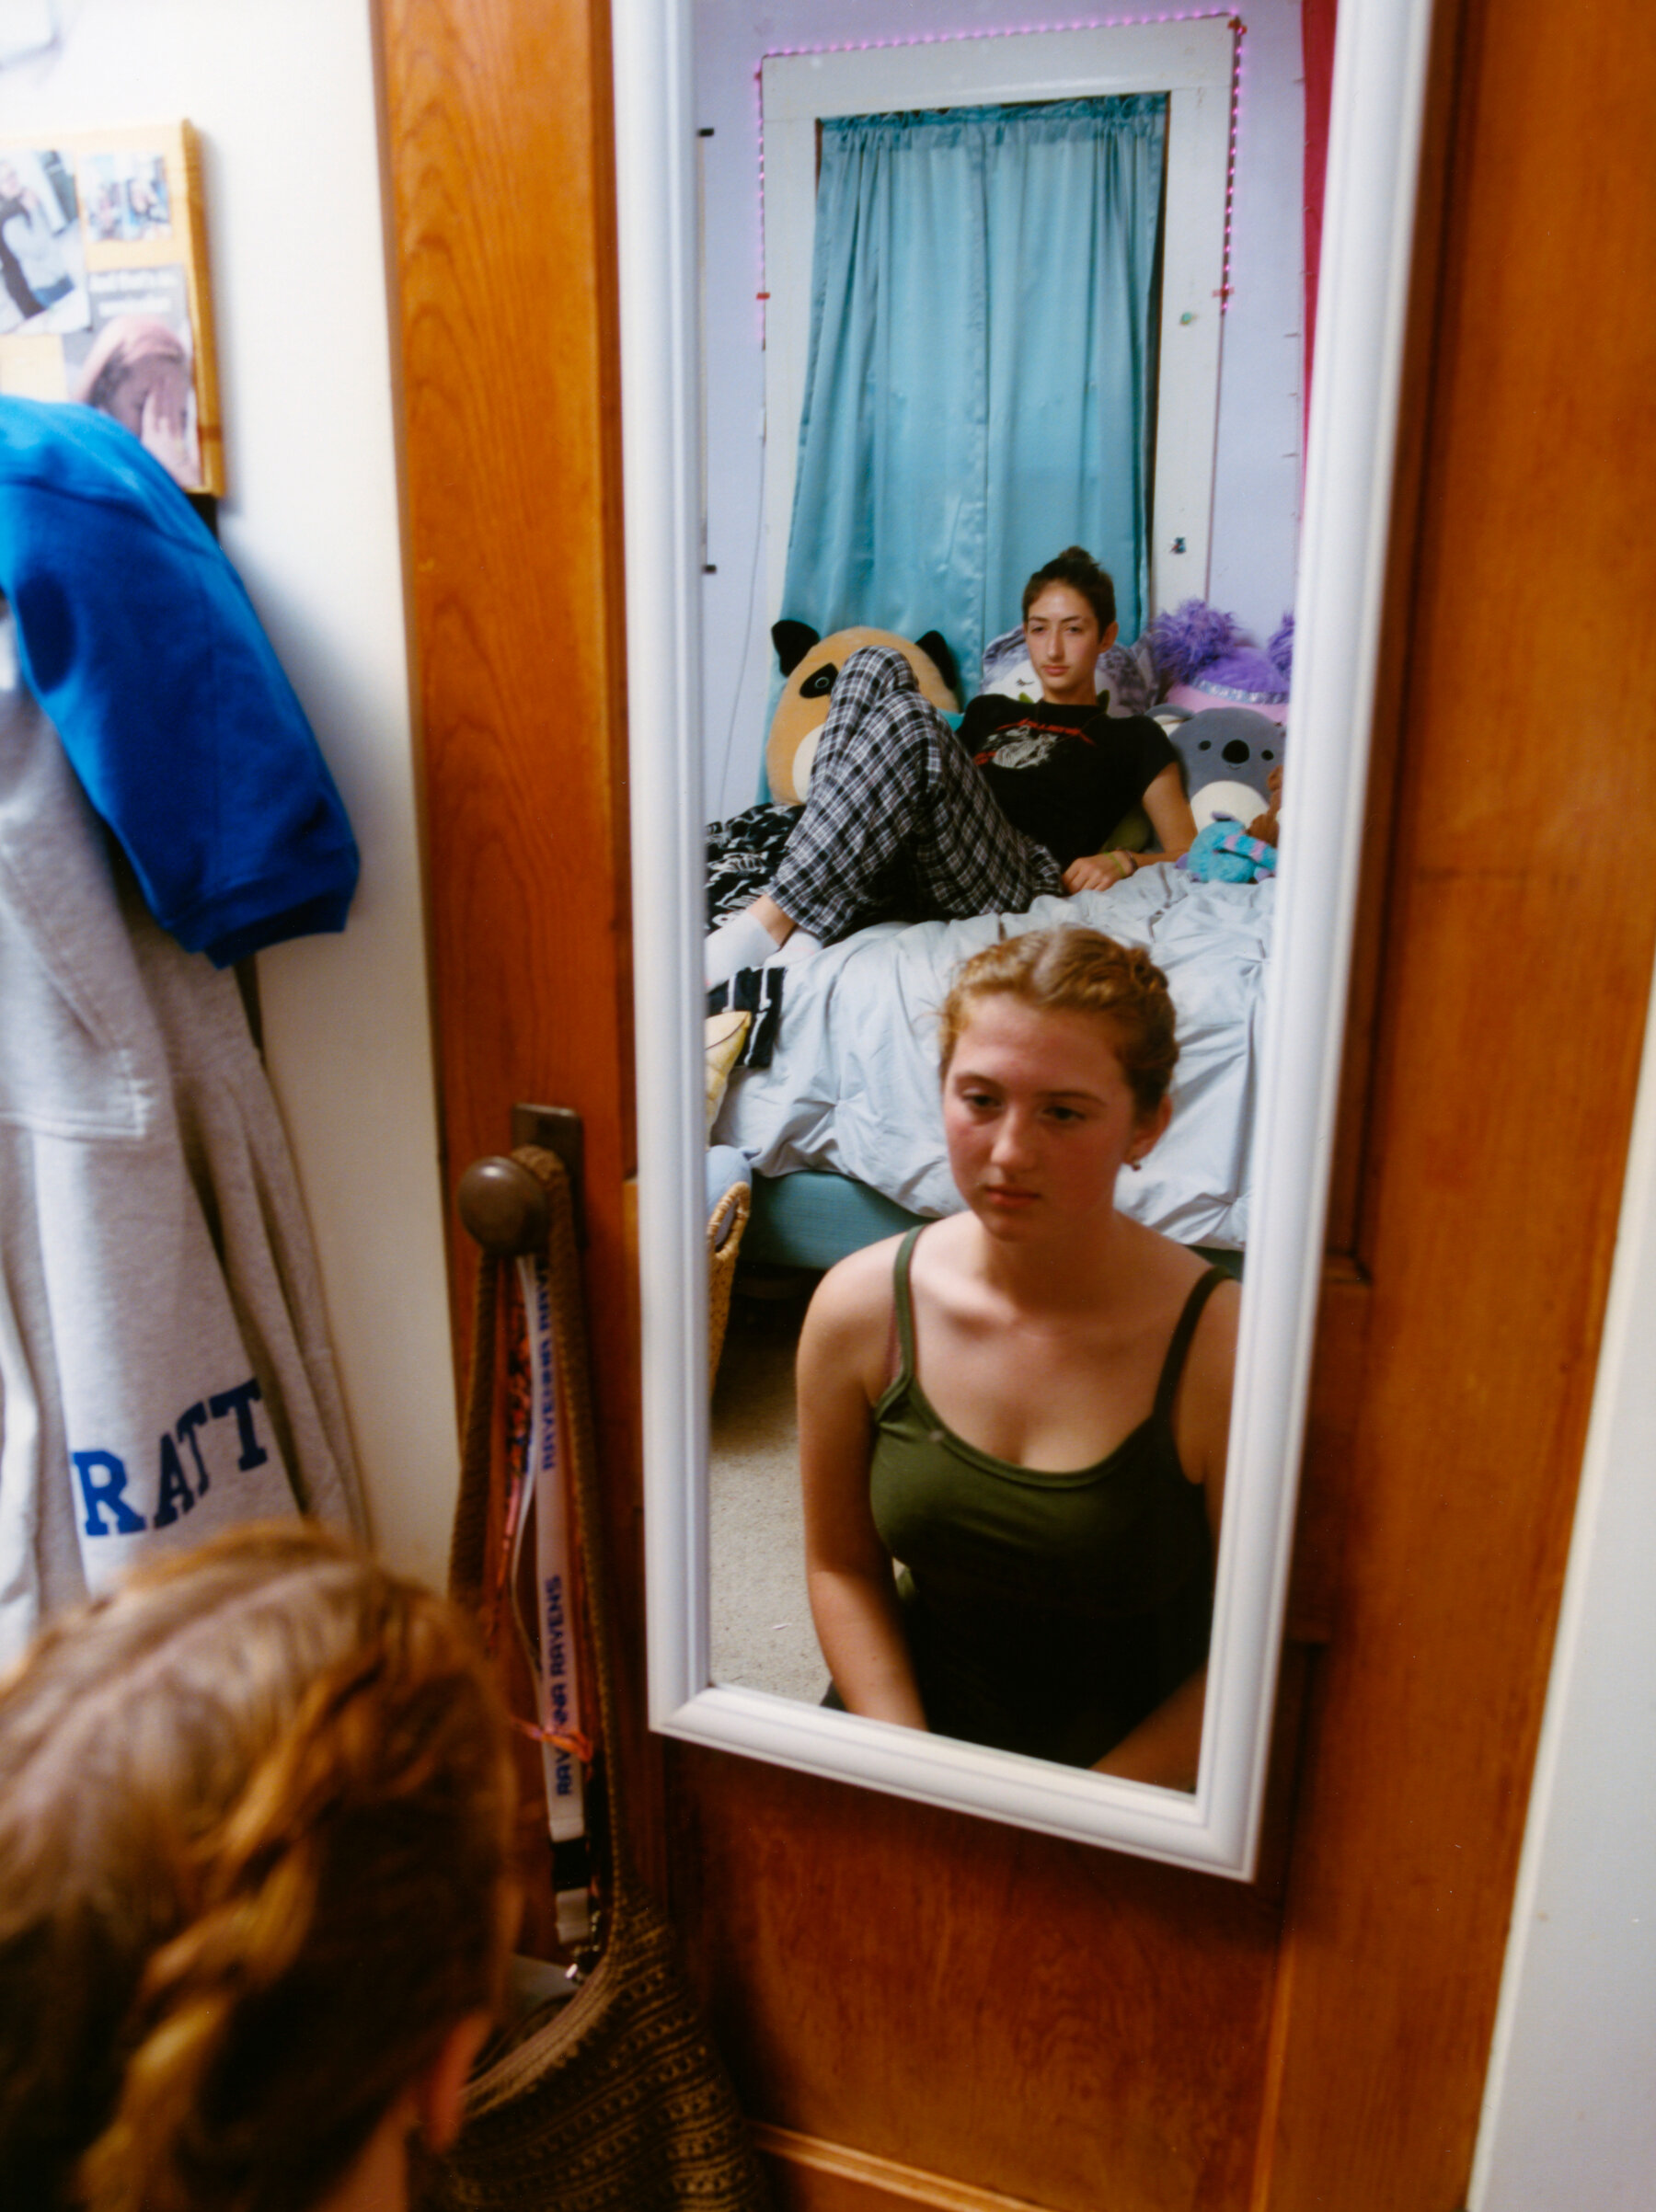 The reflection of two girls in a white-framed mirror, which is hanging over a wod door in a bedroom. The girl in front is sitting on the floor and wearing a dark green tank top. The girl in the back is reclining on a bed and wears a black T-shirt and plaid pajama pants.